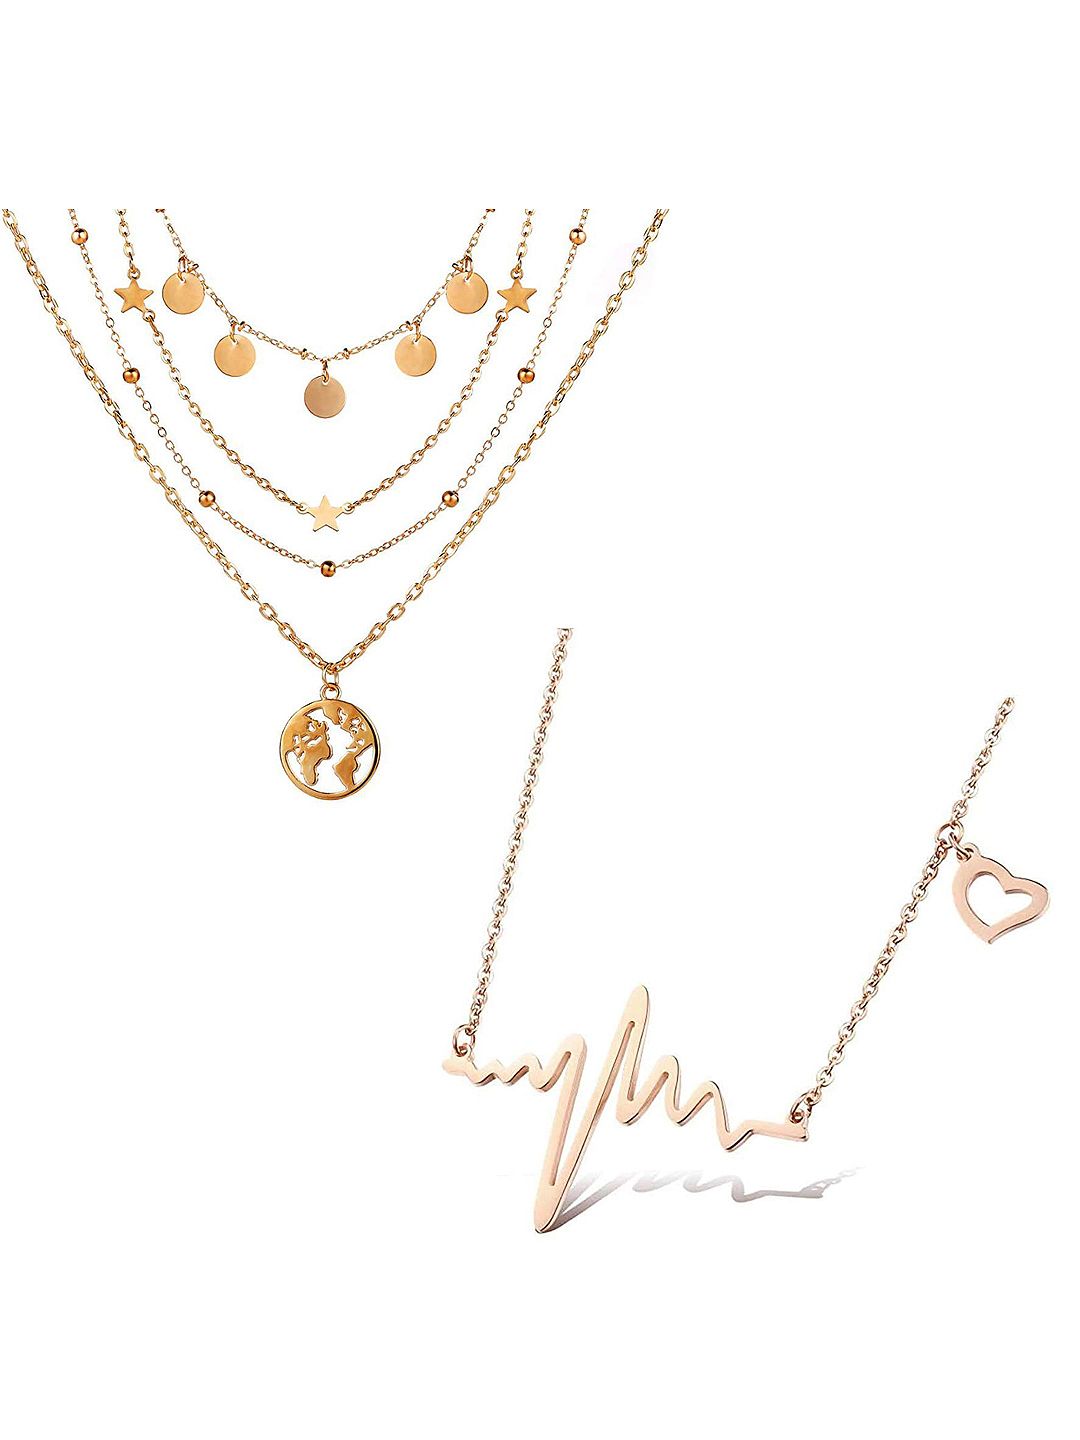 Vembley Set of 2 Gold-Toned Gold-Plated Heartbeat and Butterfly Pendant Layered Necklace Price in India